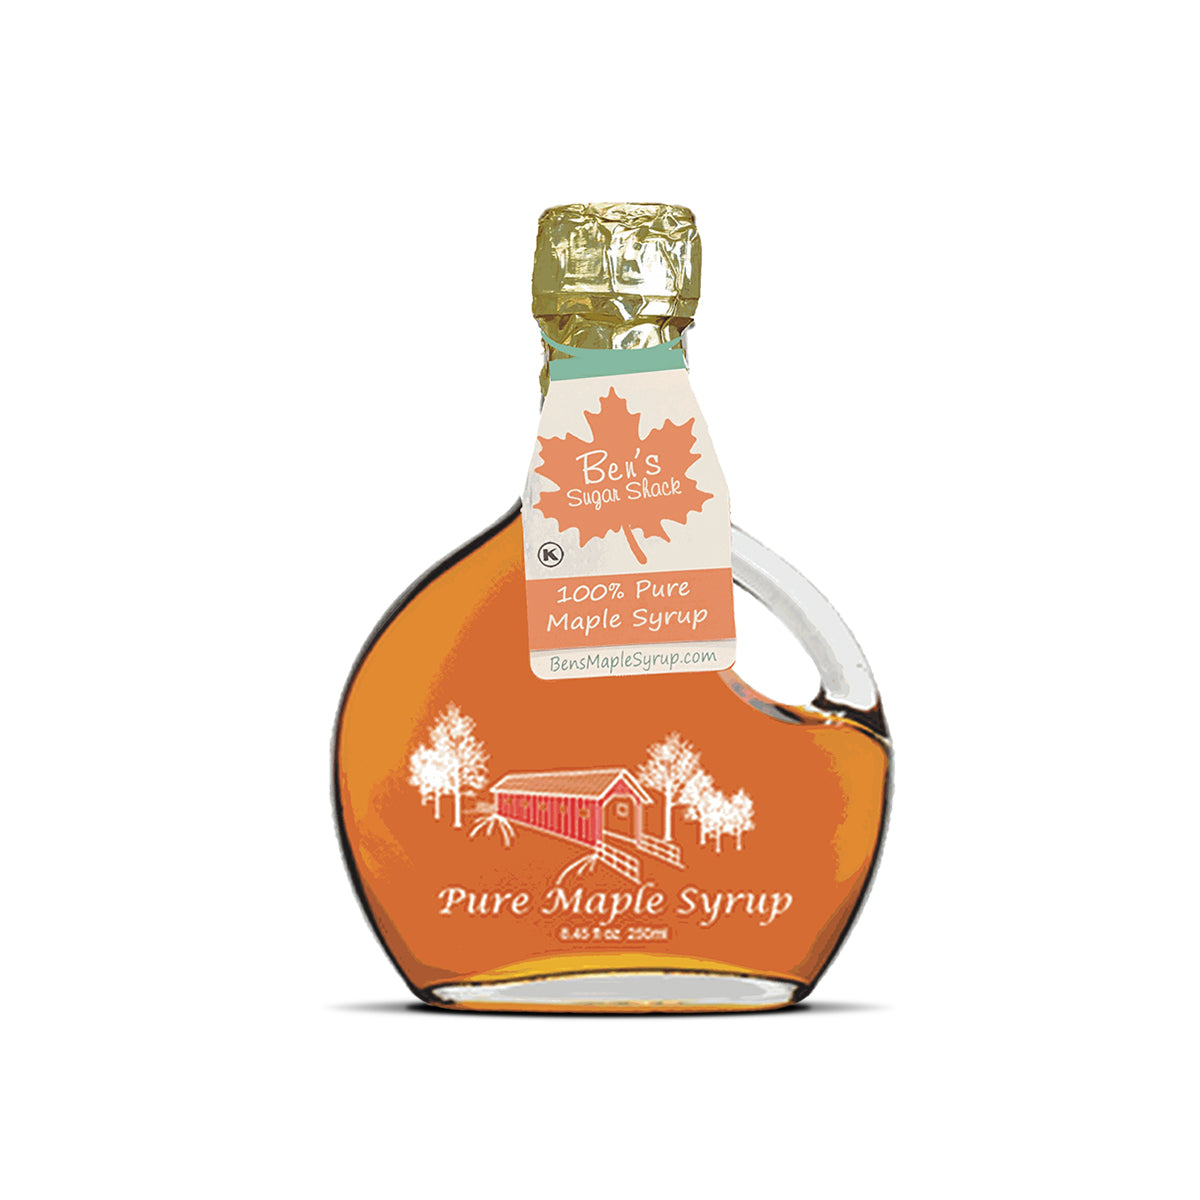 Pure Maple Syrup in Covered Bridge Basque Glass Bottle - 8.45 oz